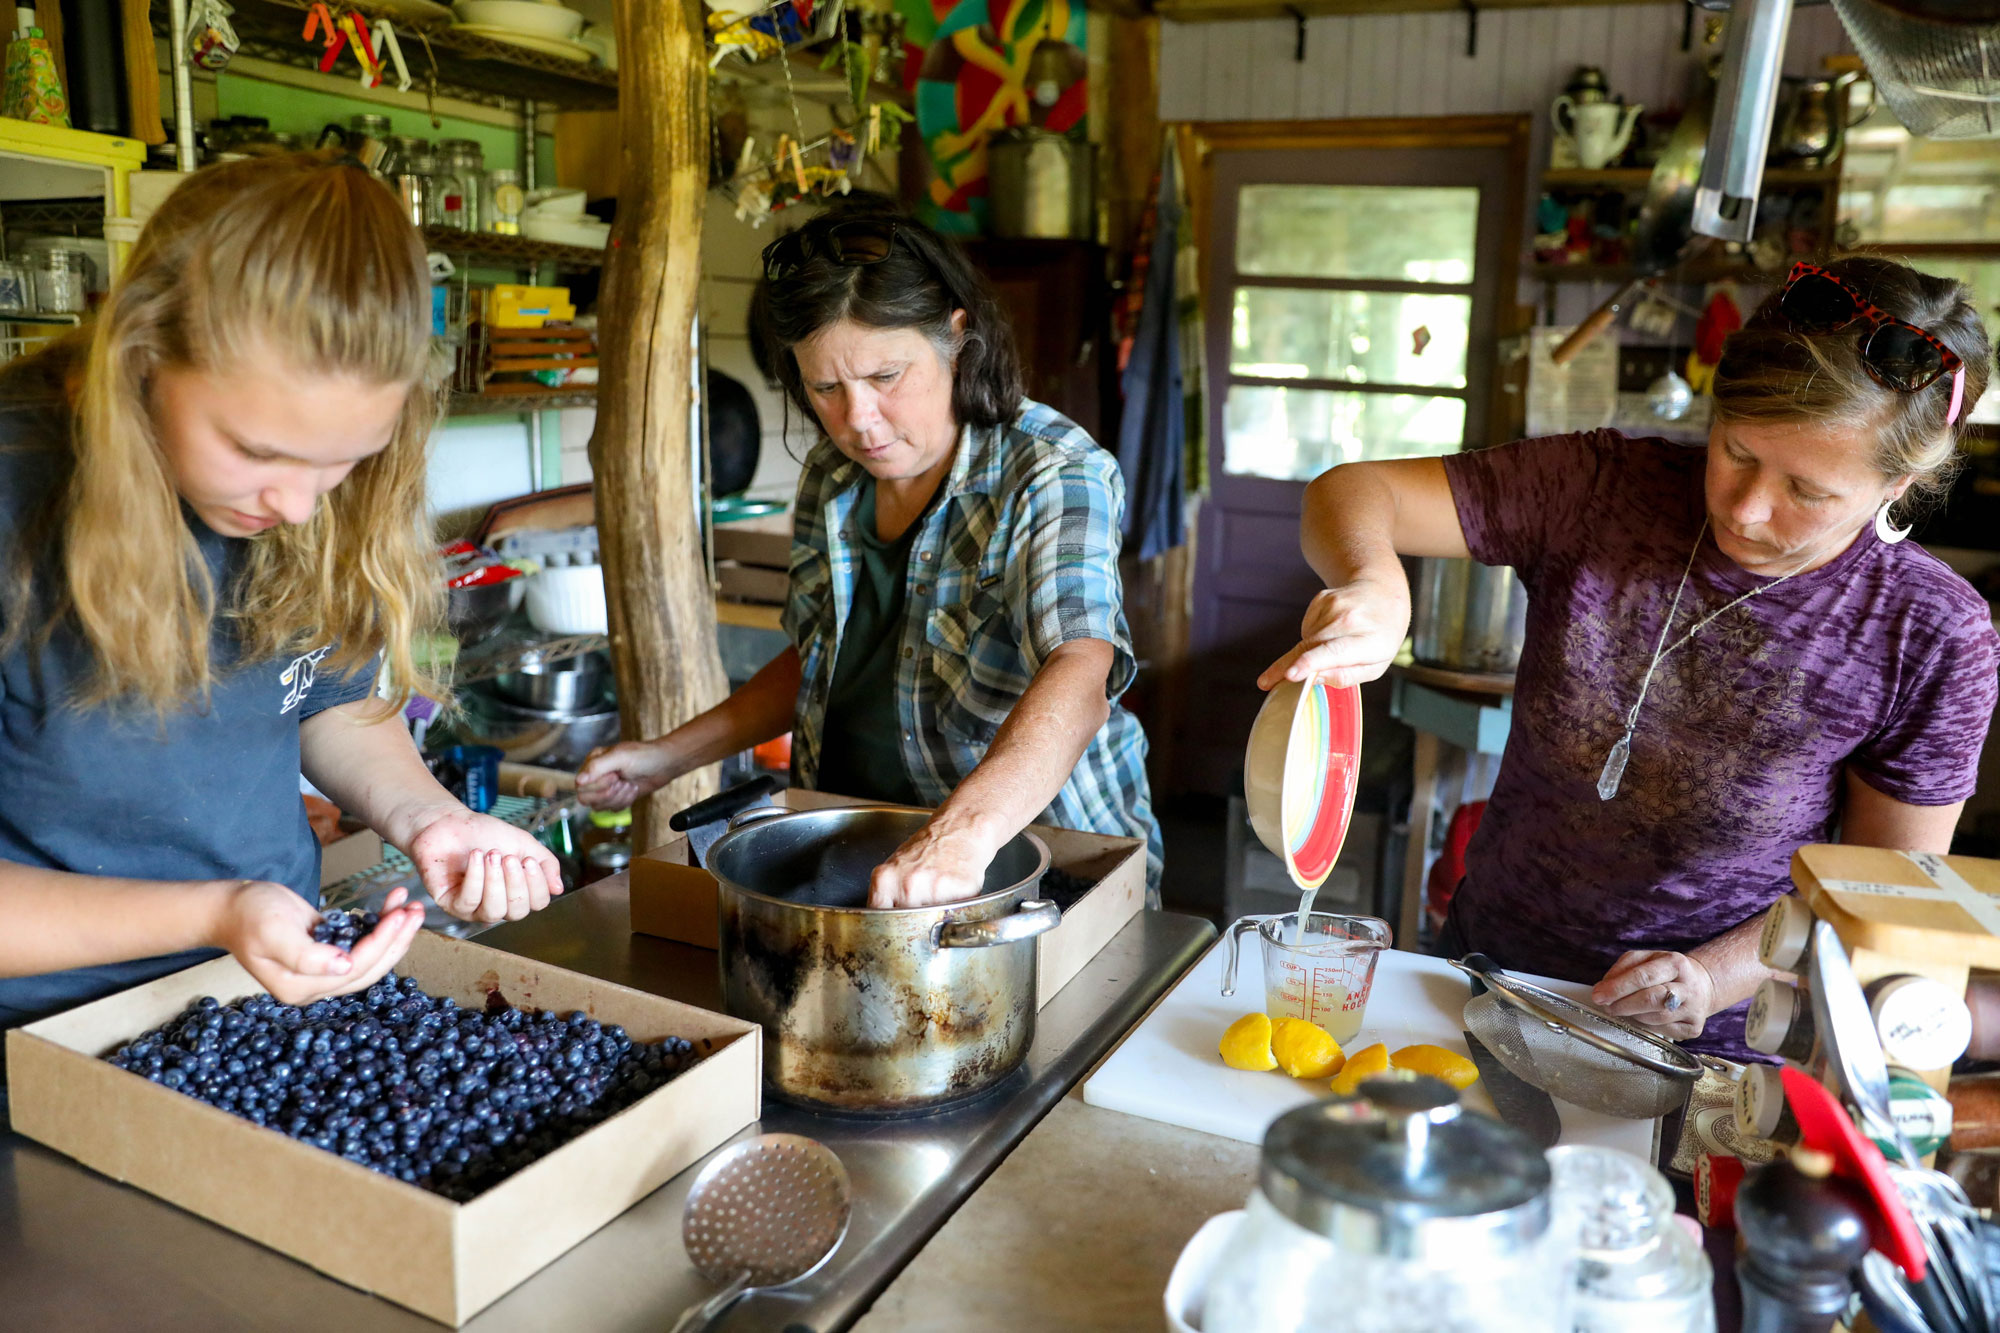 Three women prepare blueberry syrup, gathering berries, putting them in a pot, and pouring lemonade